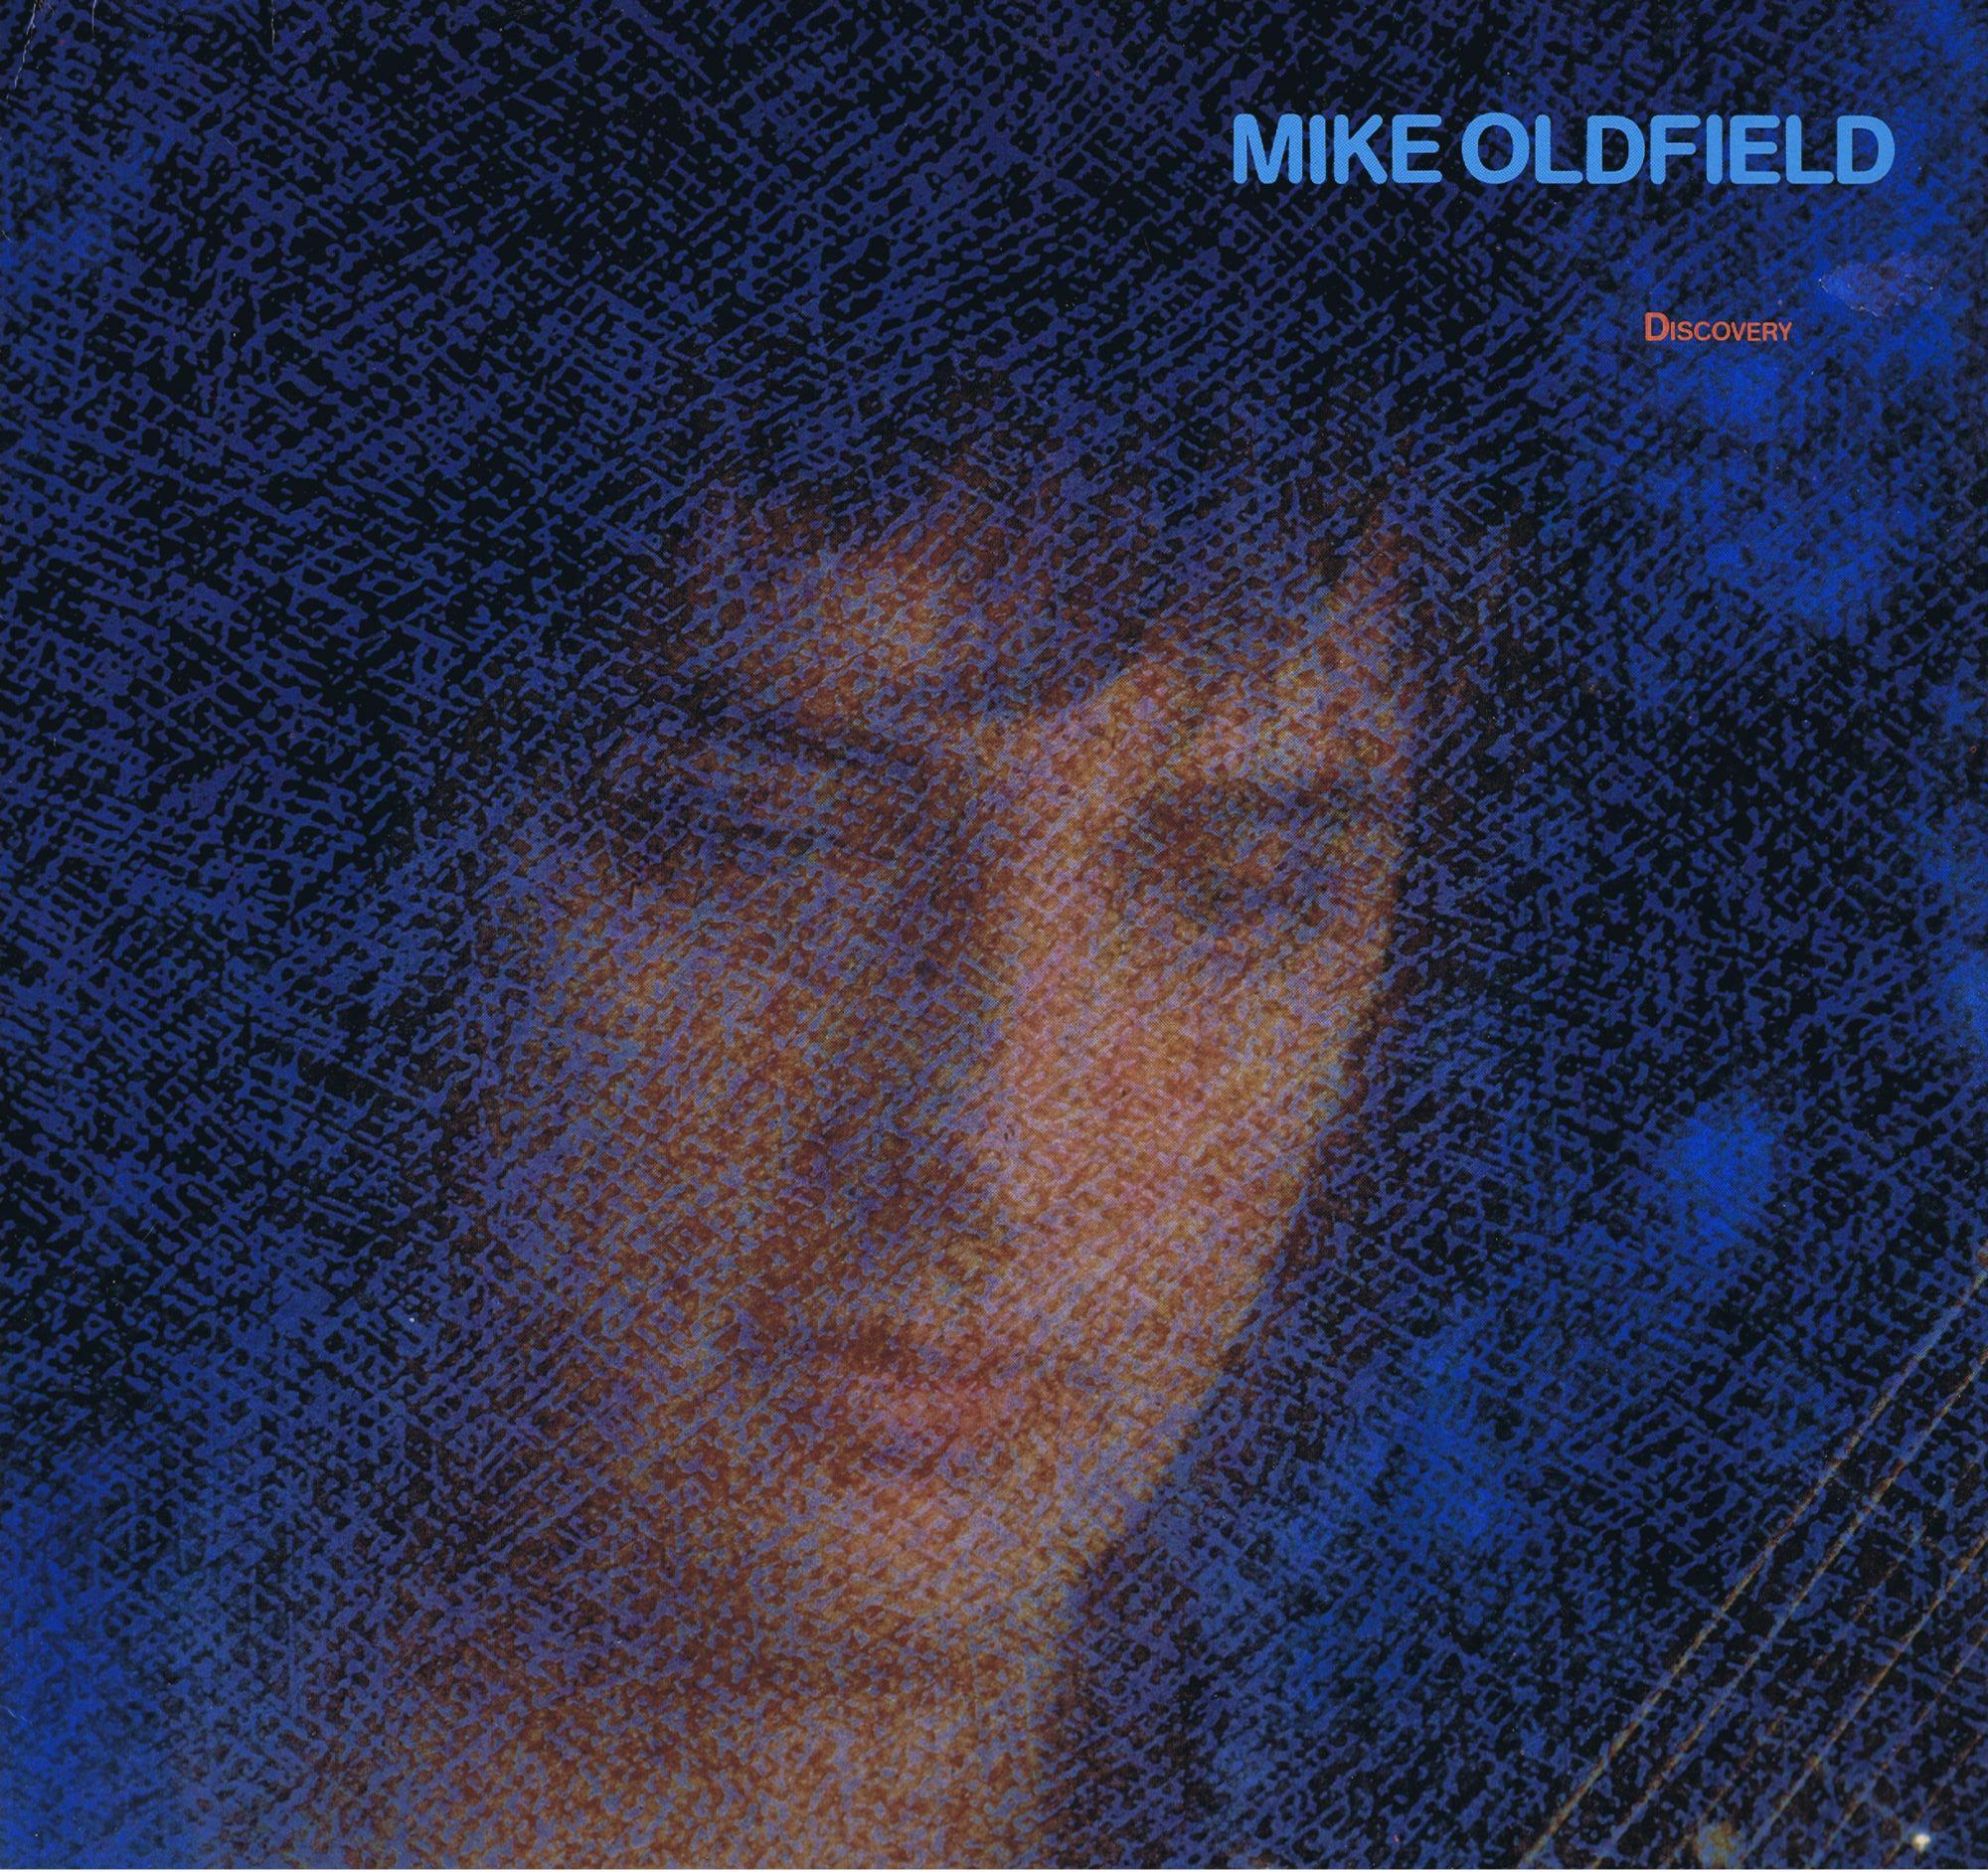 Acheter disque vinyle MIKE OLDFIELD DISCOVERY a vendre